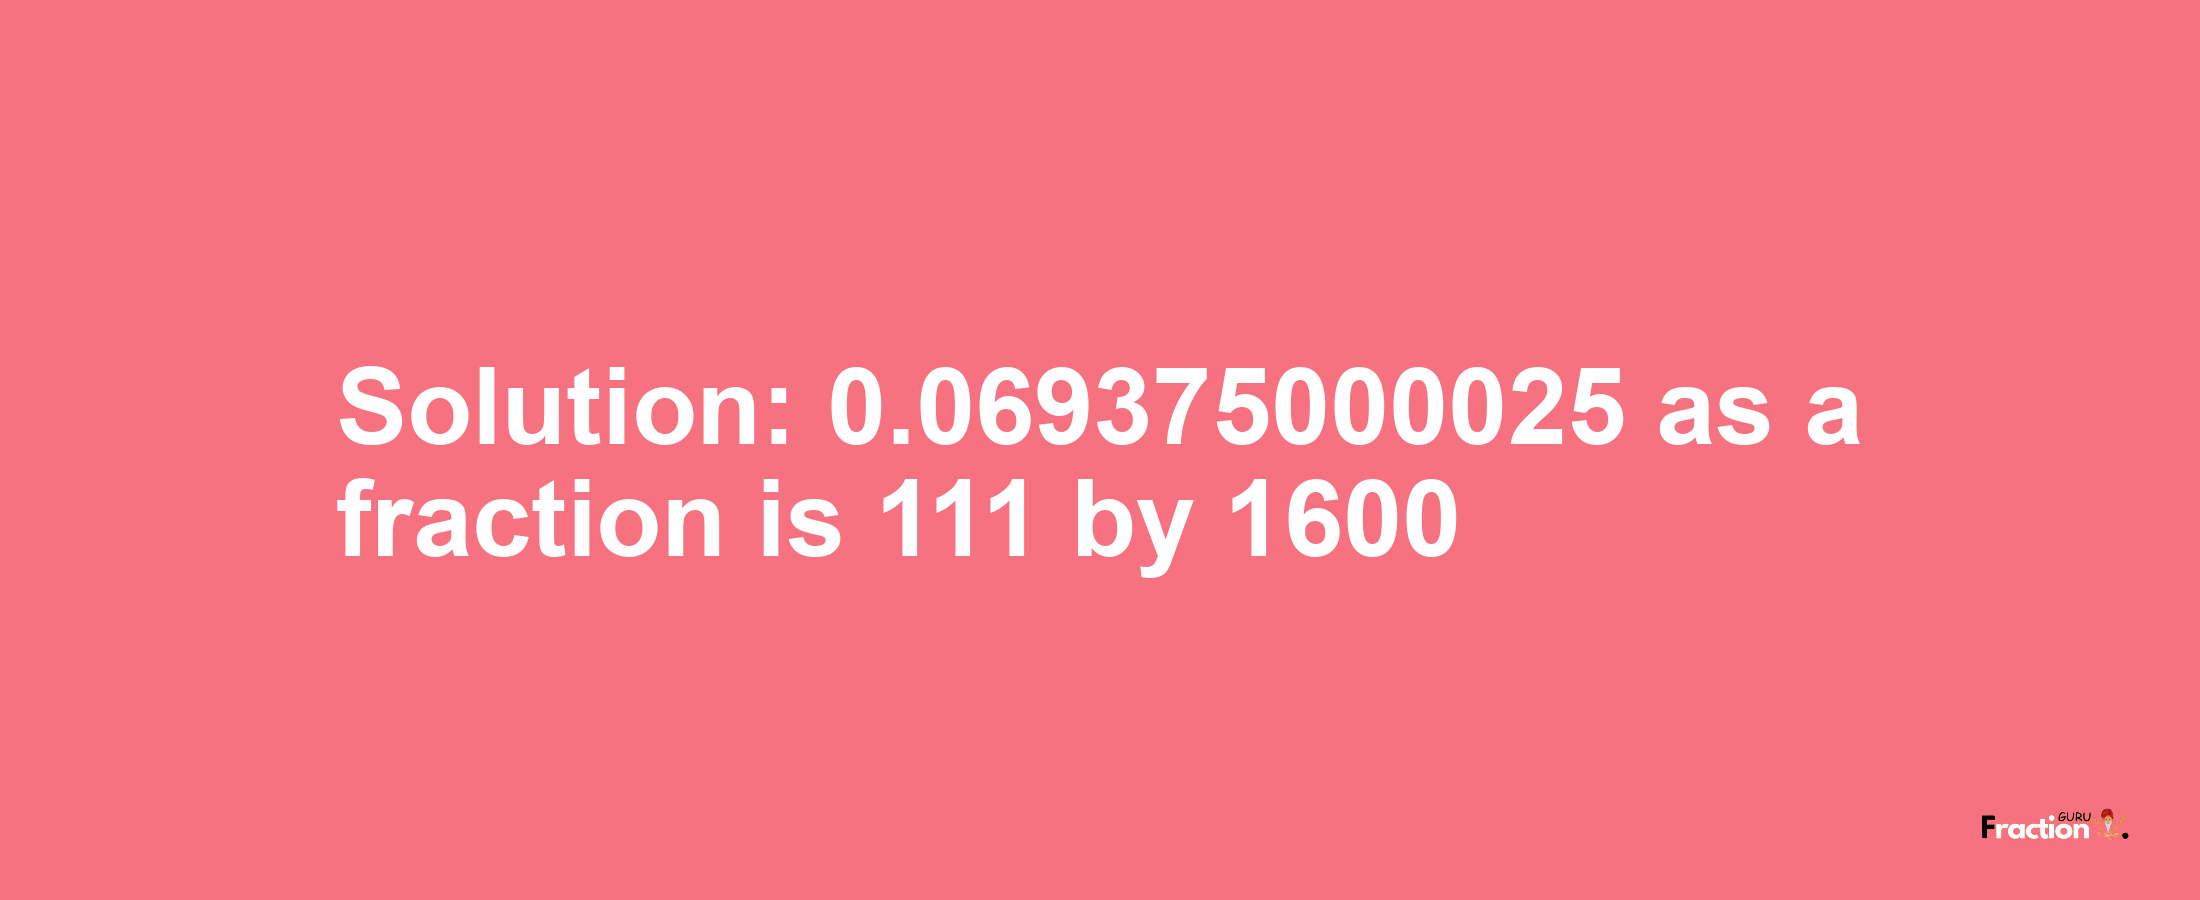 Solution:0.069375000025 as a fraction is 111/1600